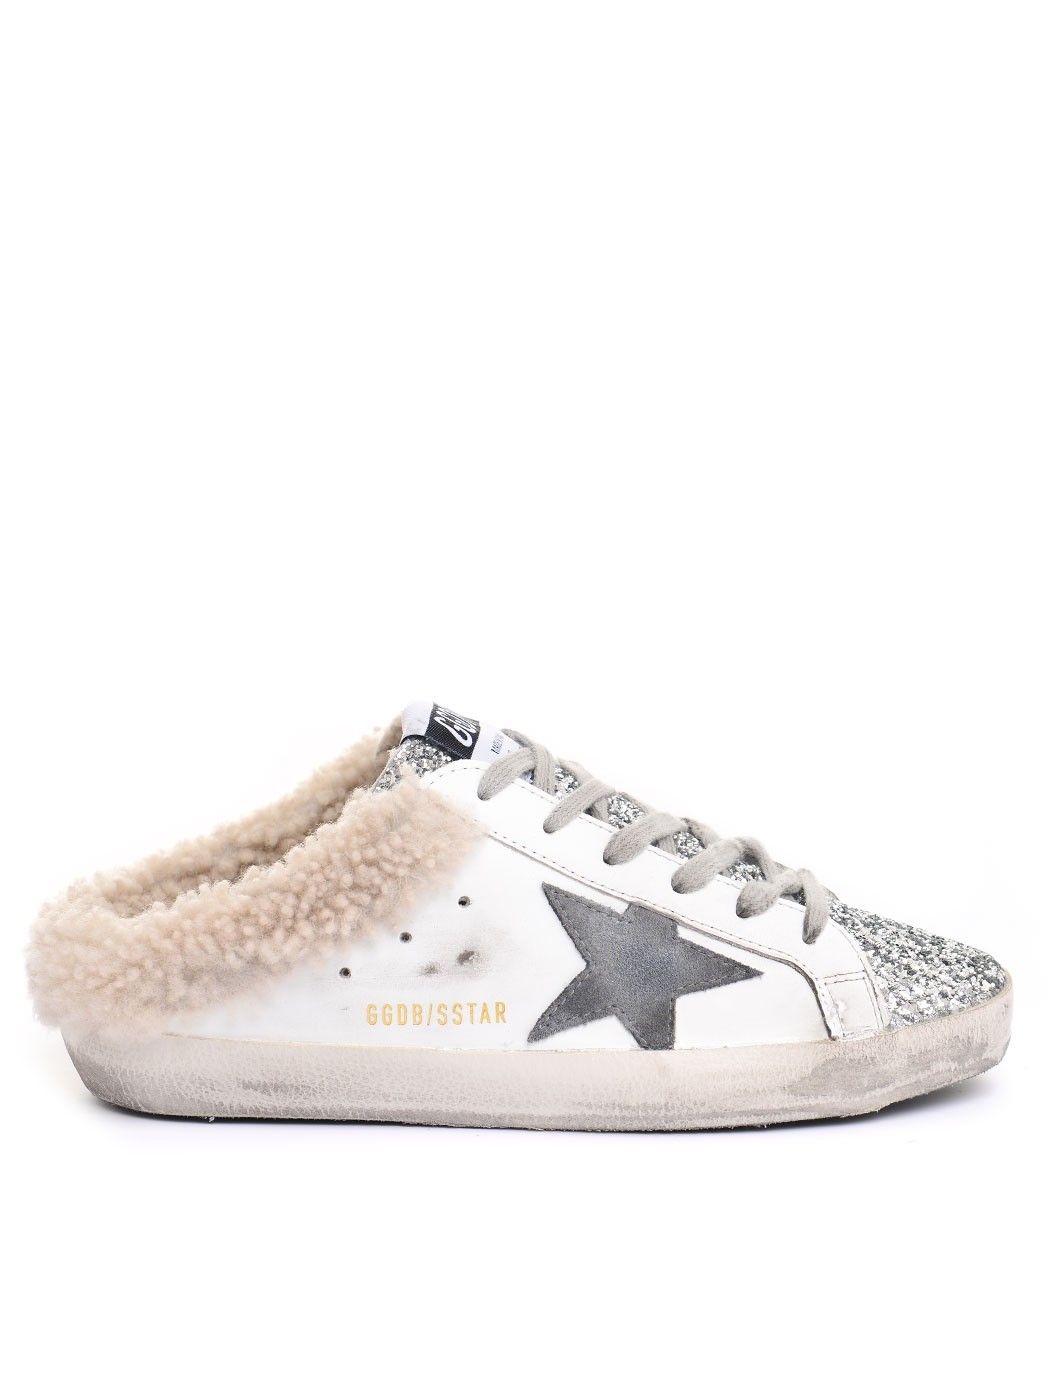  WOMAN SHOES,GIVENCHY SHOES,GOLDEN GOOSE SHOES,MARNI SHOES  GOLDEN GOOSE GWF00110